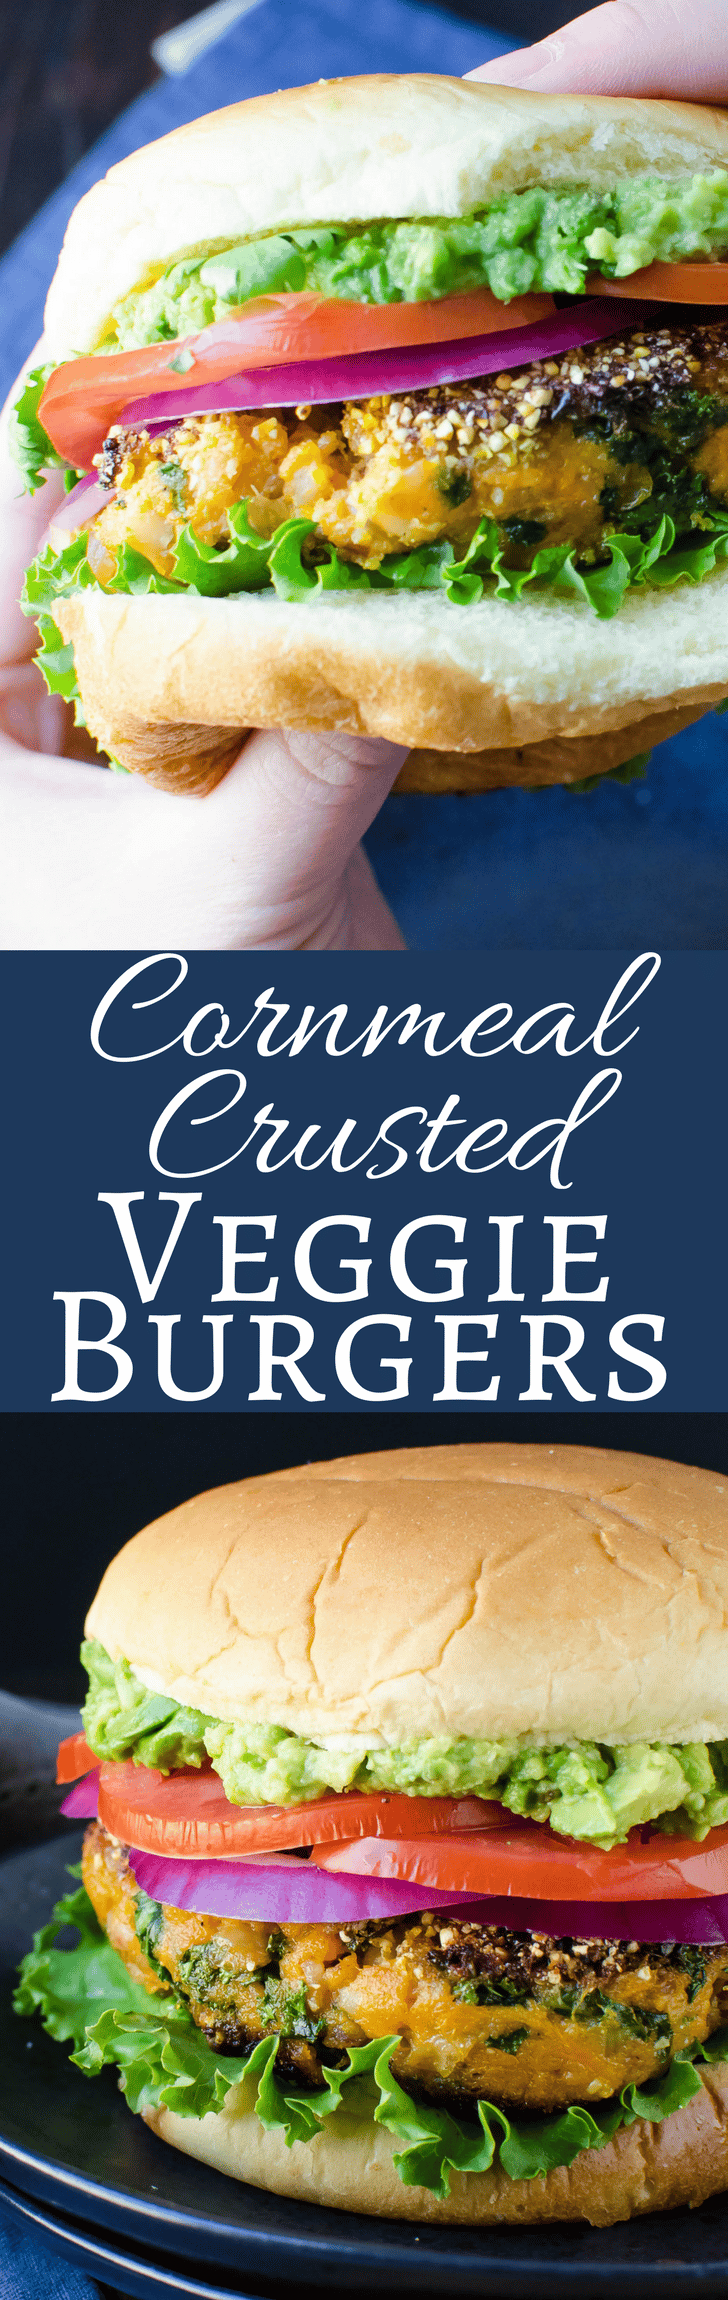 This easy recipe for Cornmeal Crusted Veggie Burgers will surprise you! A soft interior with a crispy cornmeal coating! Delicious!